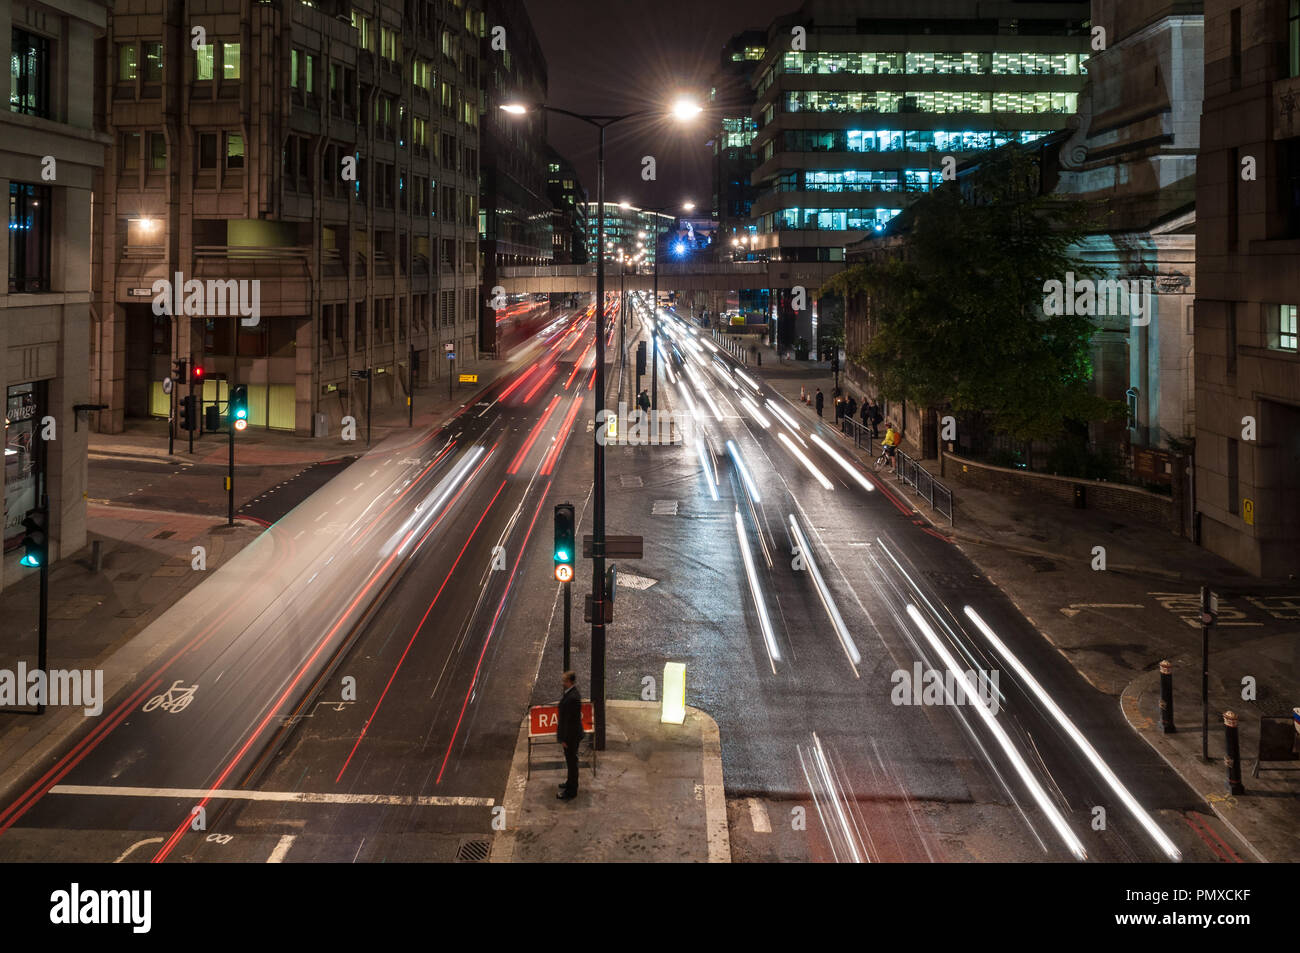 London, England, UK - October 13, 2010: Traffic flows along Lower Thames Street, the main dual carriageway route through the City of London financial  Stock Photo